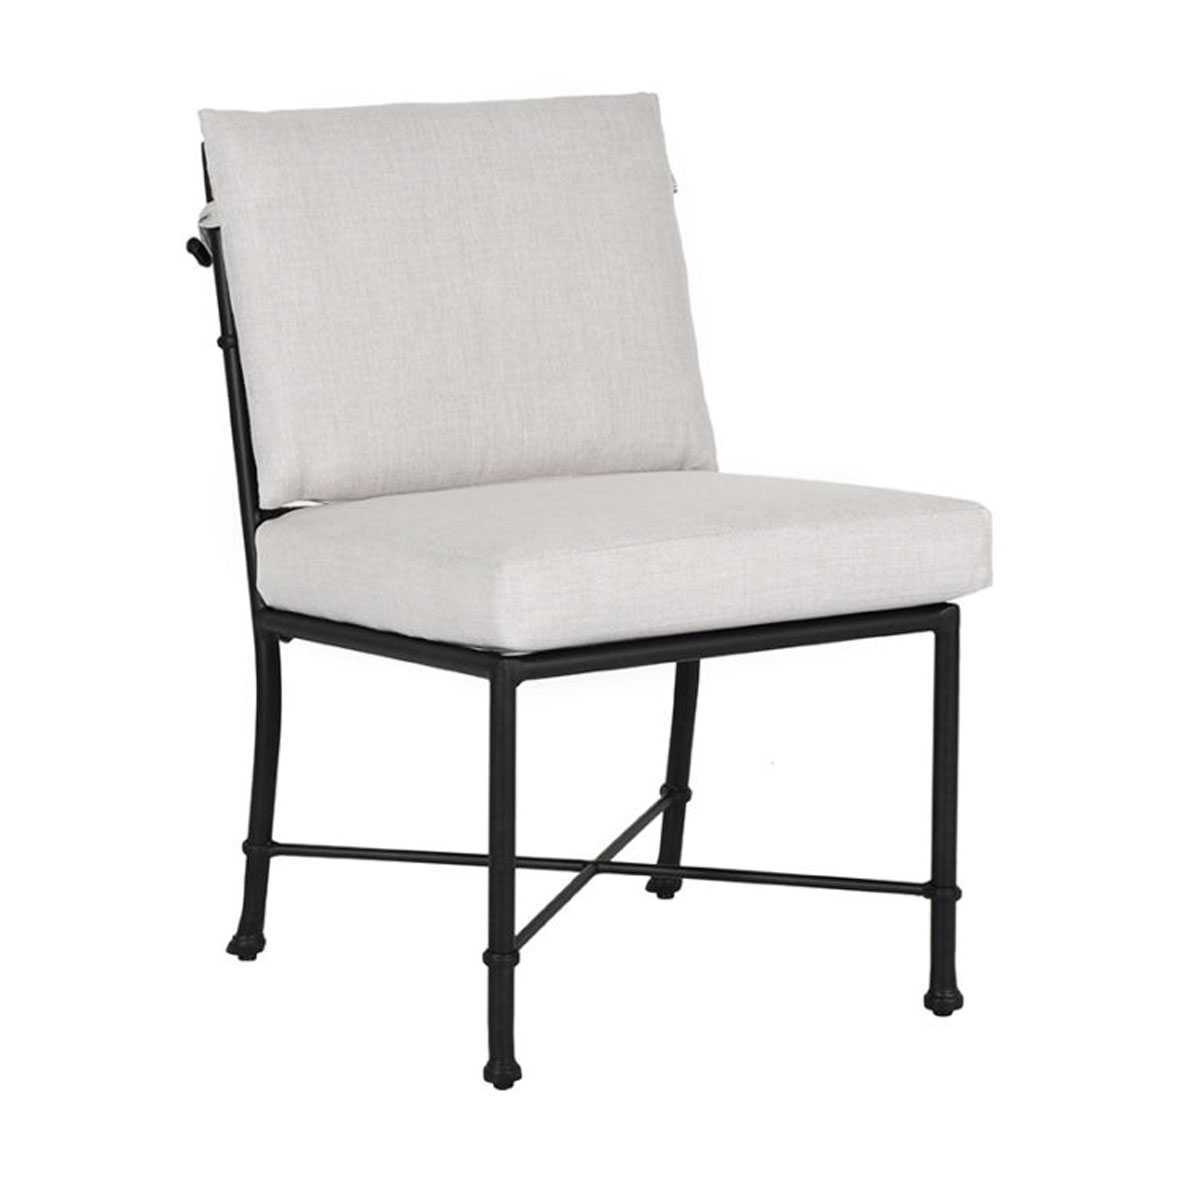 Castelle Biltmore Preserve Cushioned Armless Dining Chair